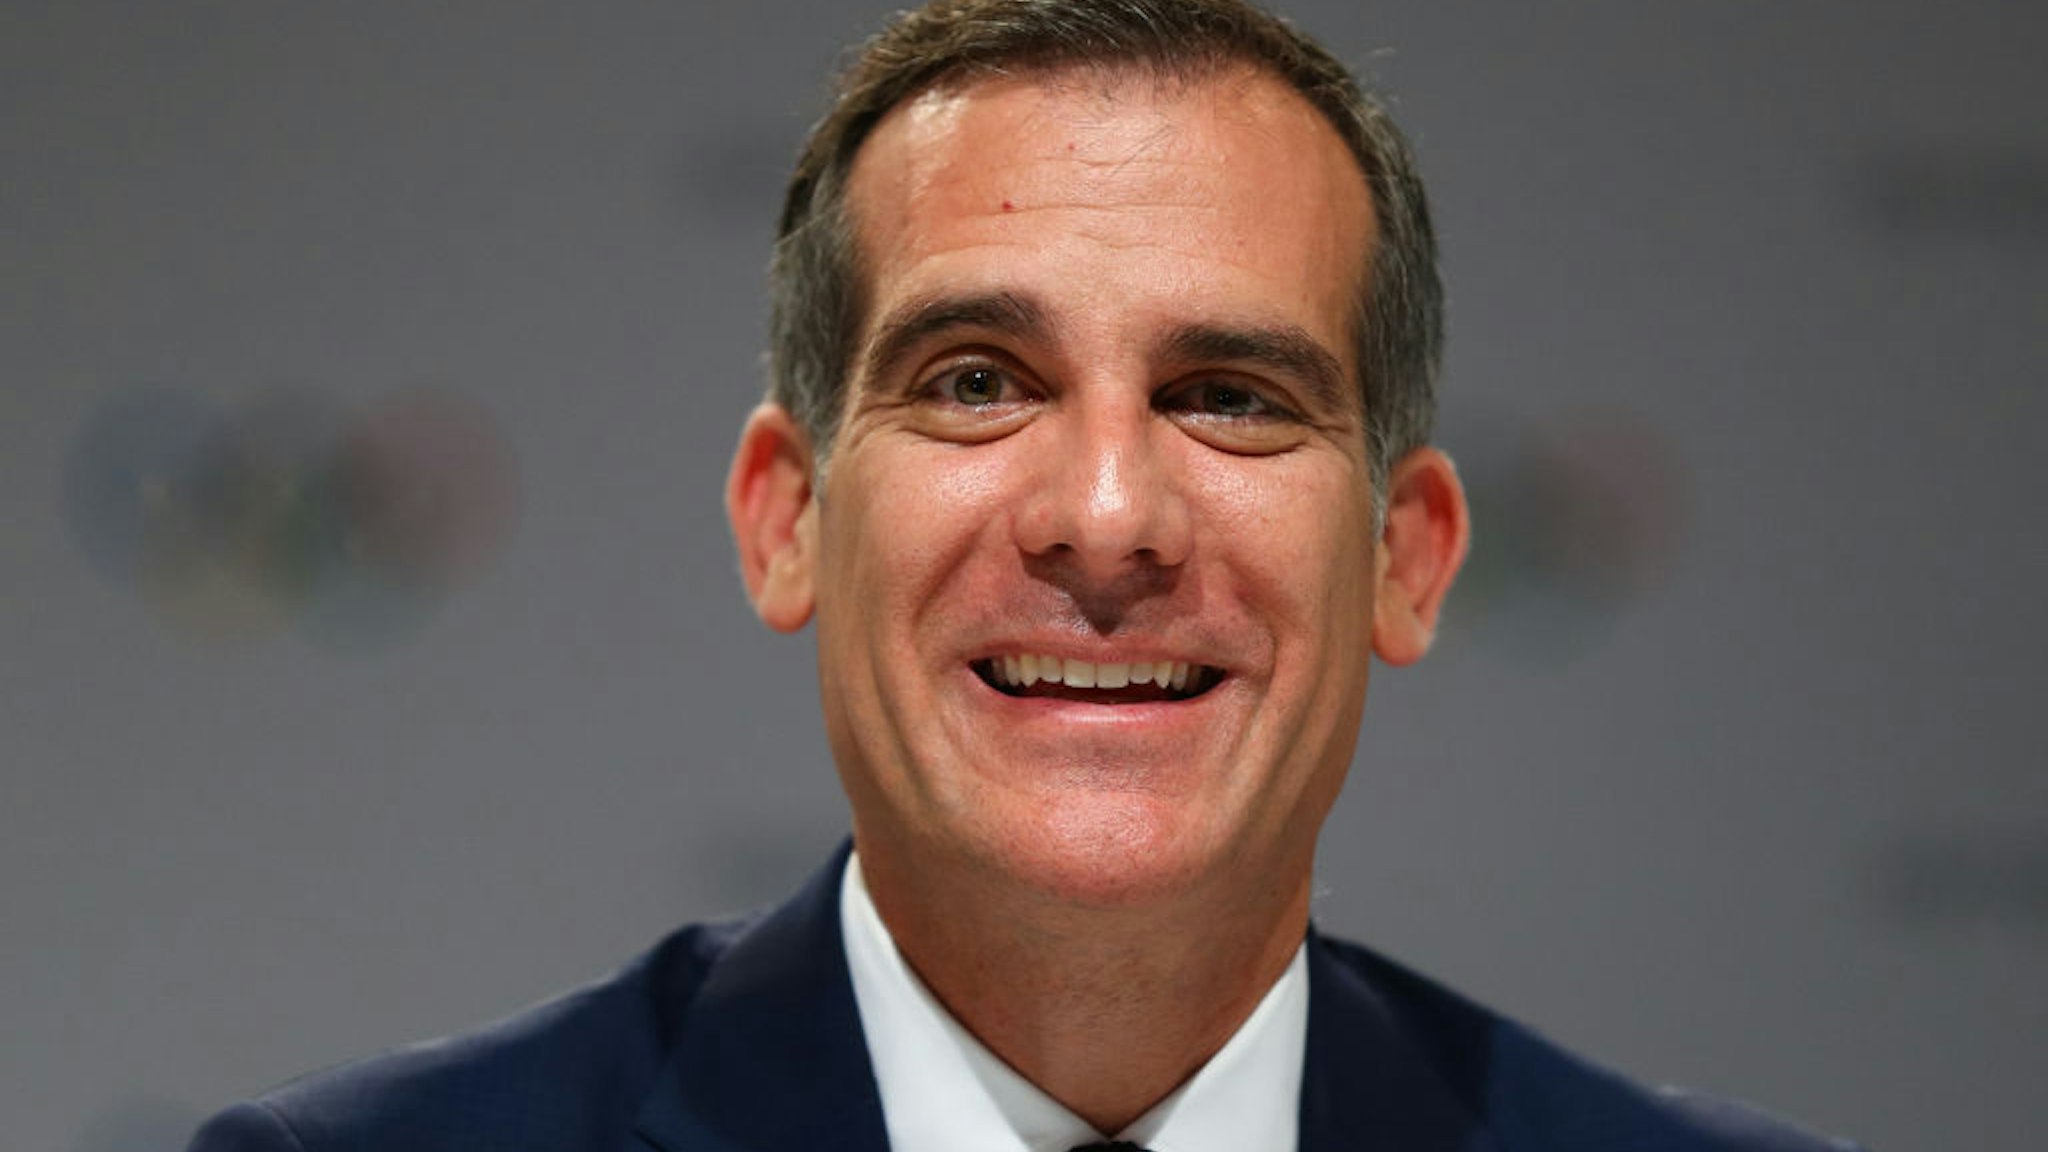 LIMA, PERU - SEPTEMBER 13: Los Angeles Mayor Eric Garcetti talks to media during a joint press conference between IOC, Paris 2024 and LA2028 during the131th IOC Session - 2024 &amp; 2028 Olympics Hosts Announcement at Lima Convention Centre on September 13, 2017 in Lima, Peru.